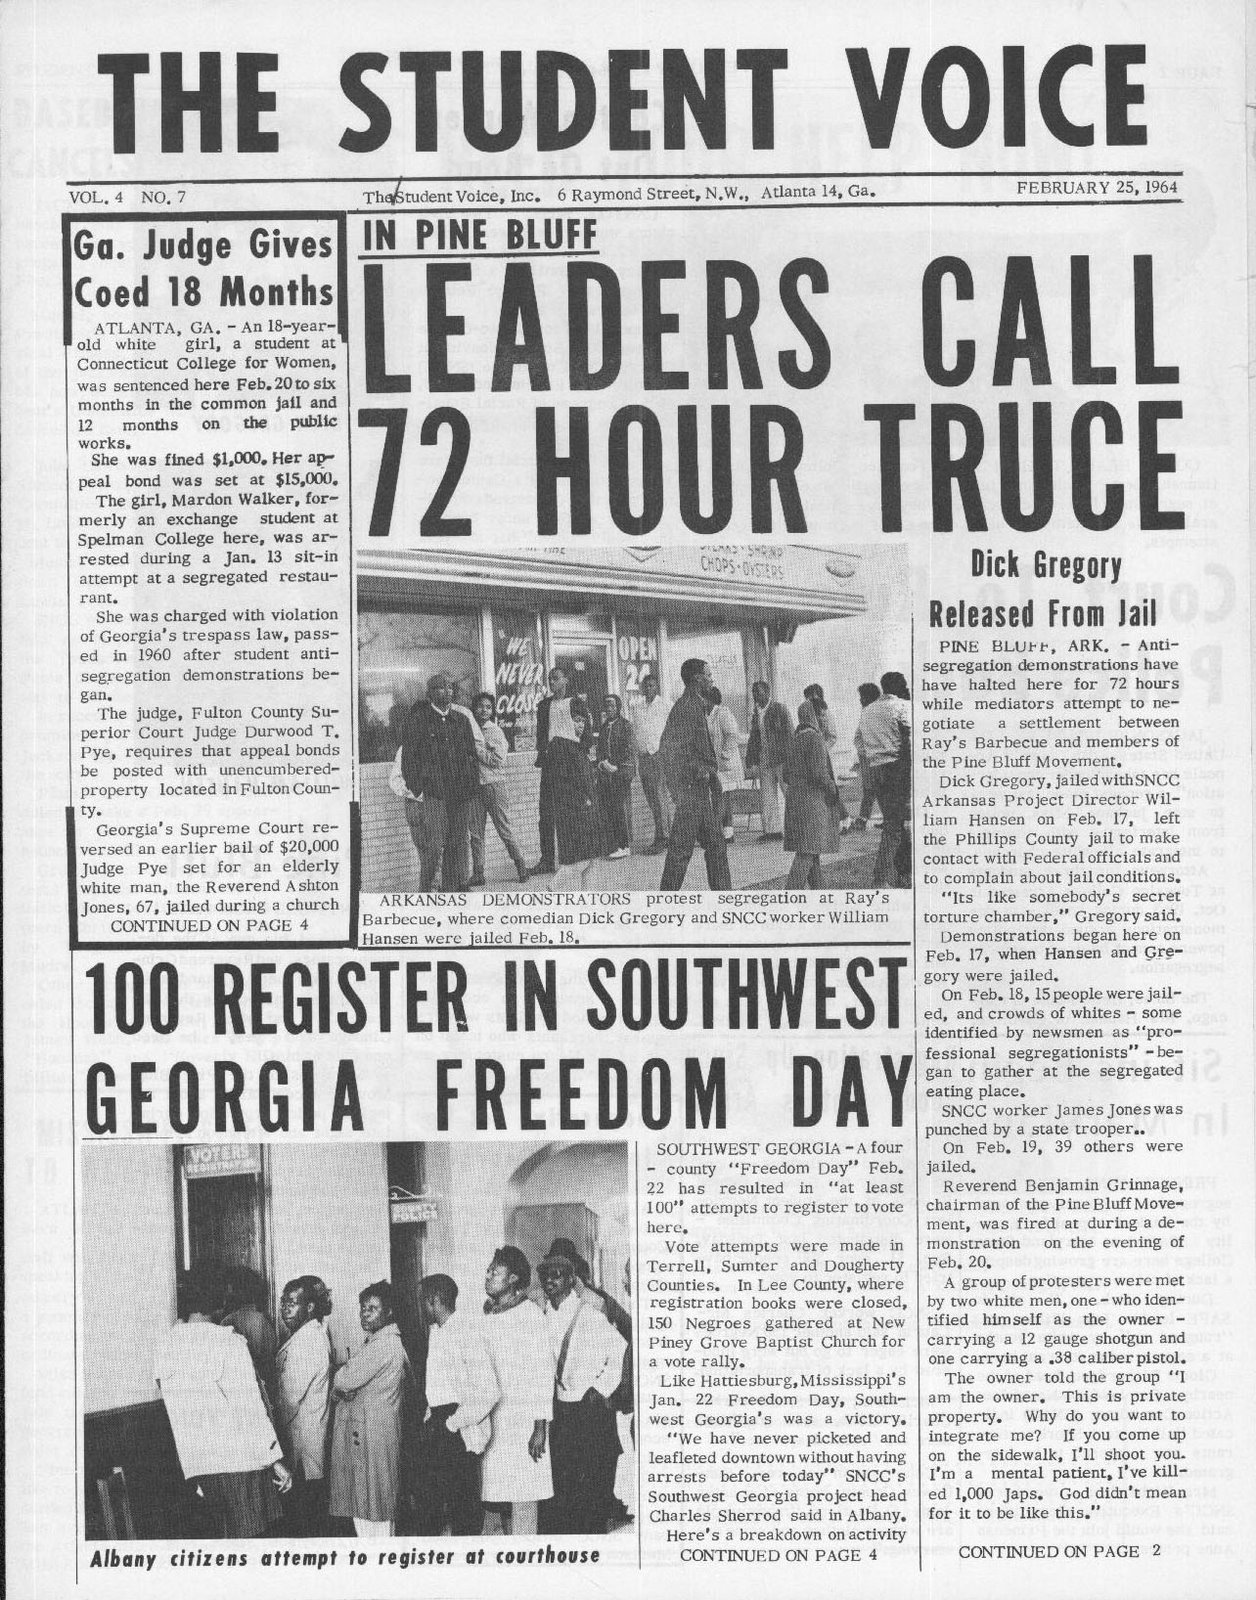 Newspaper clipping about segregation protests from February 25, 1964 issue of The Student Voice